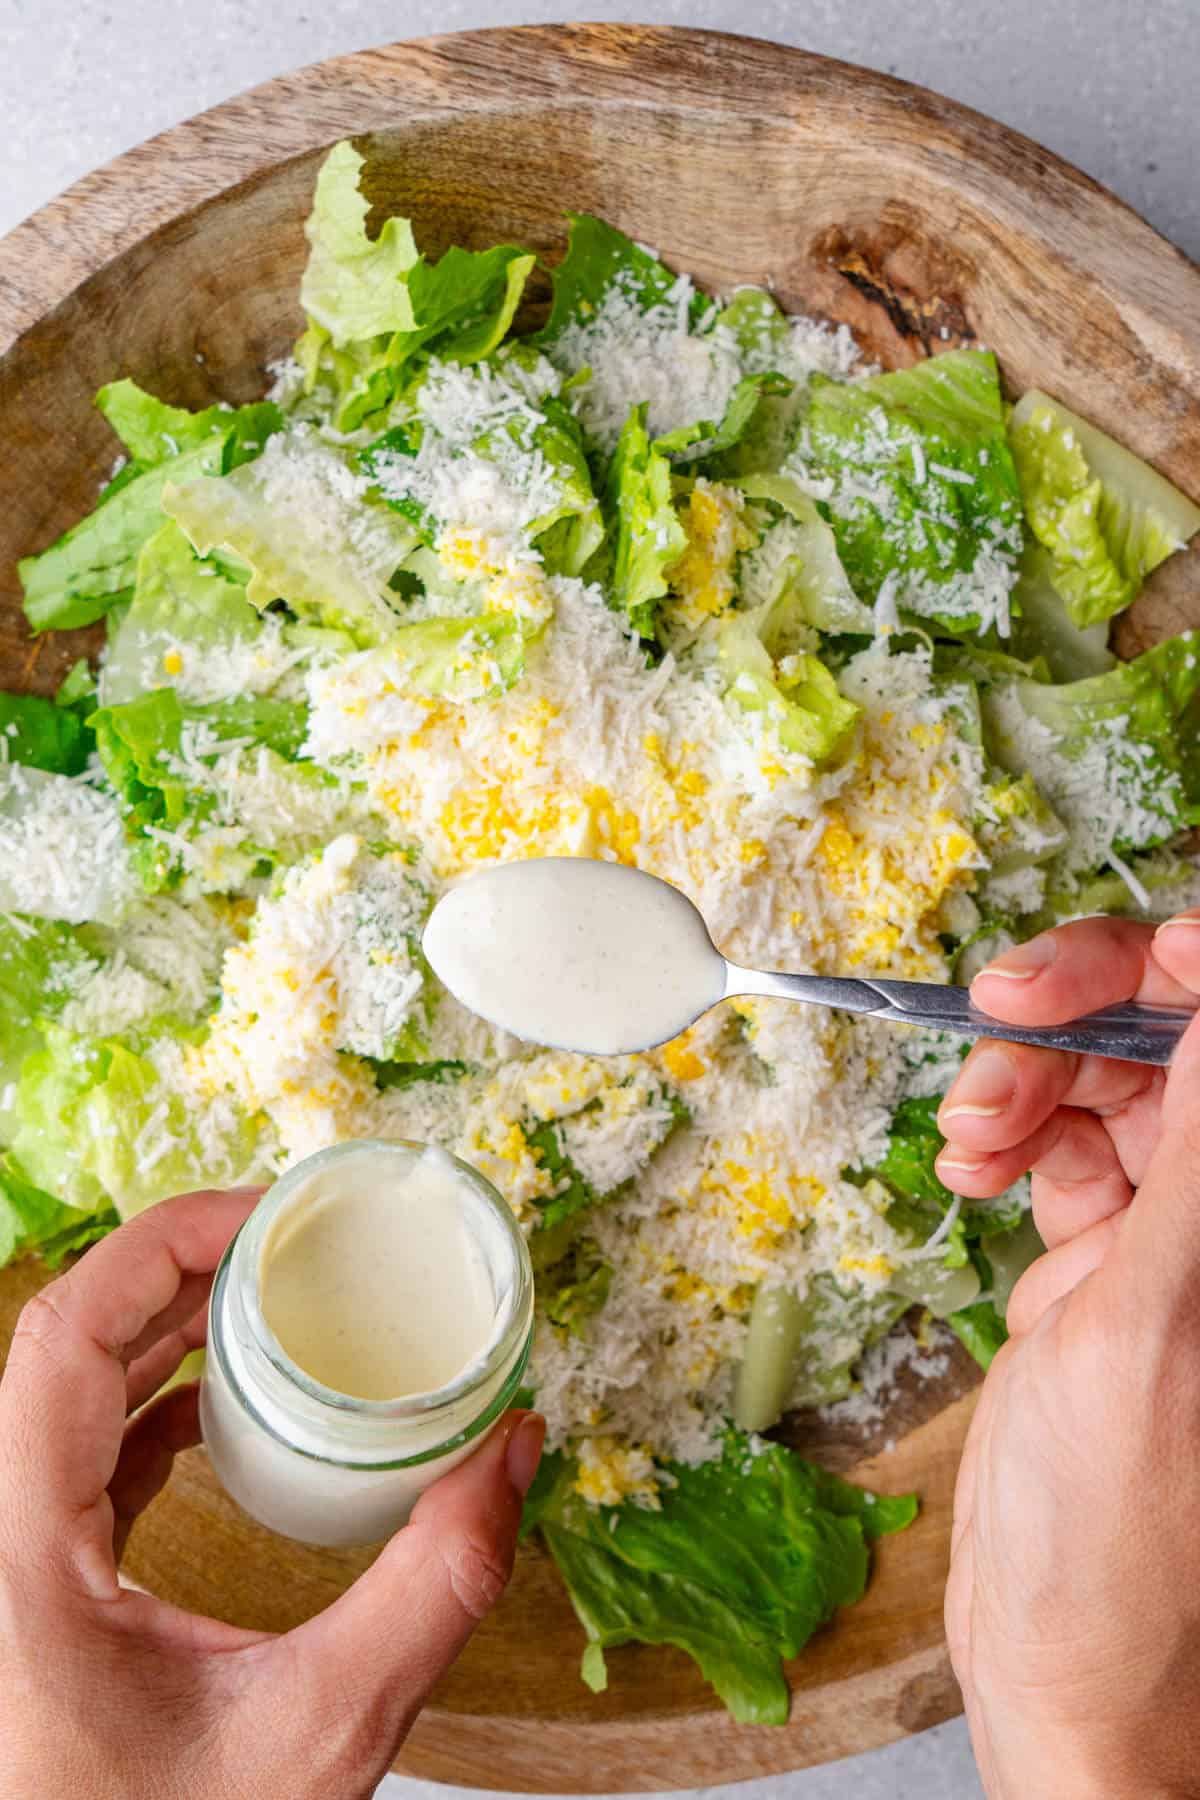 Spoon of caesar salad dressing being poured on top of a salad